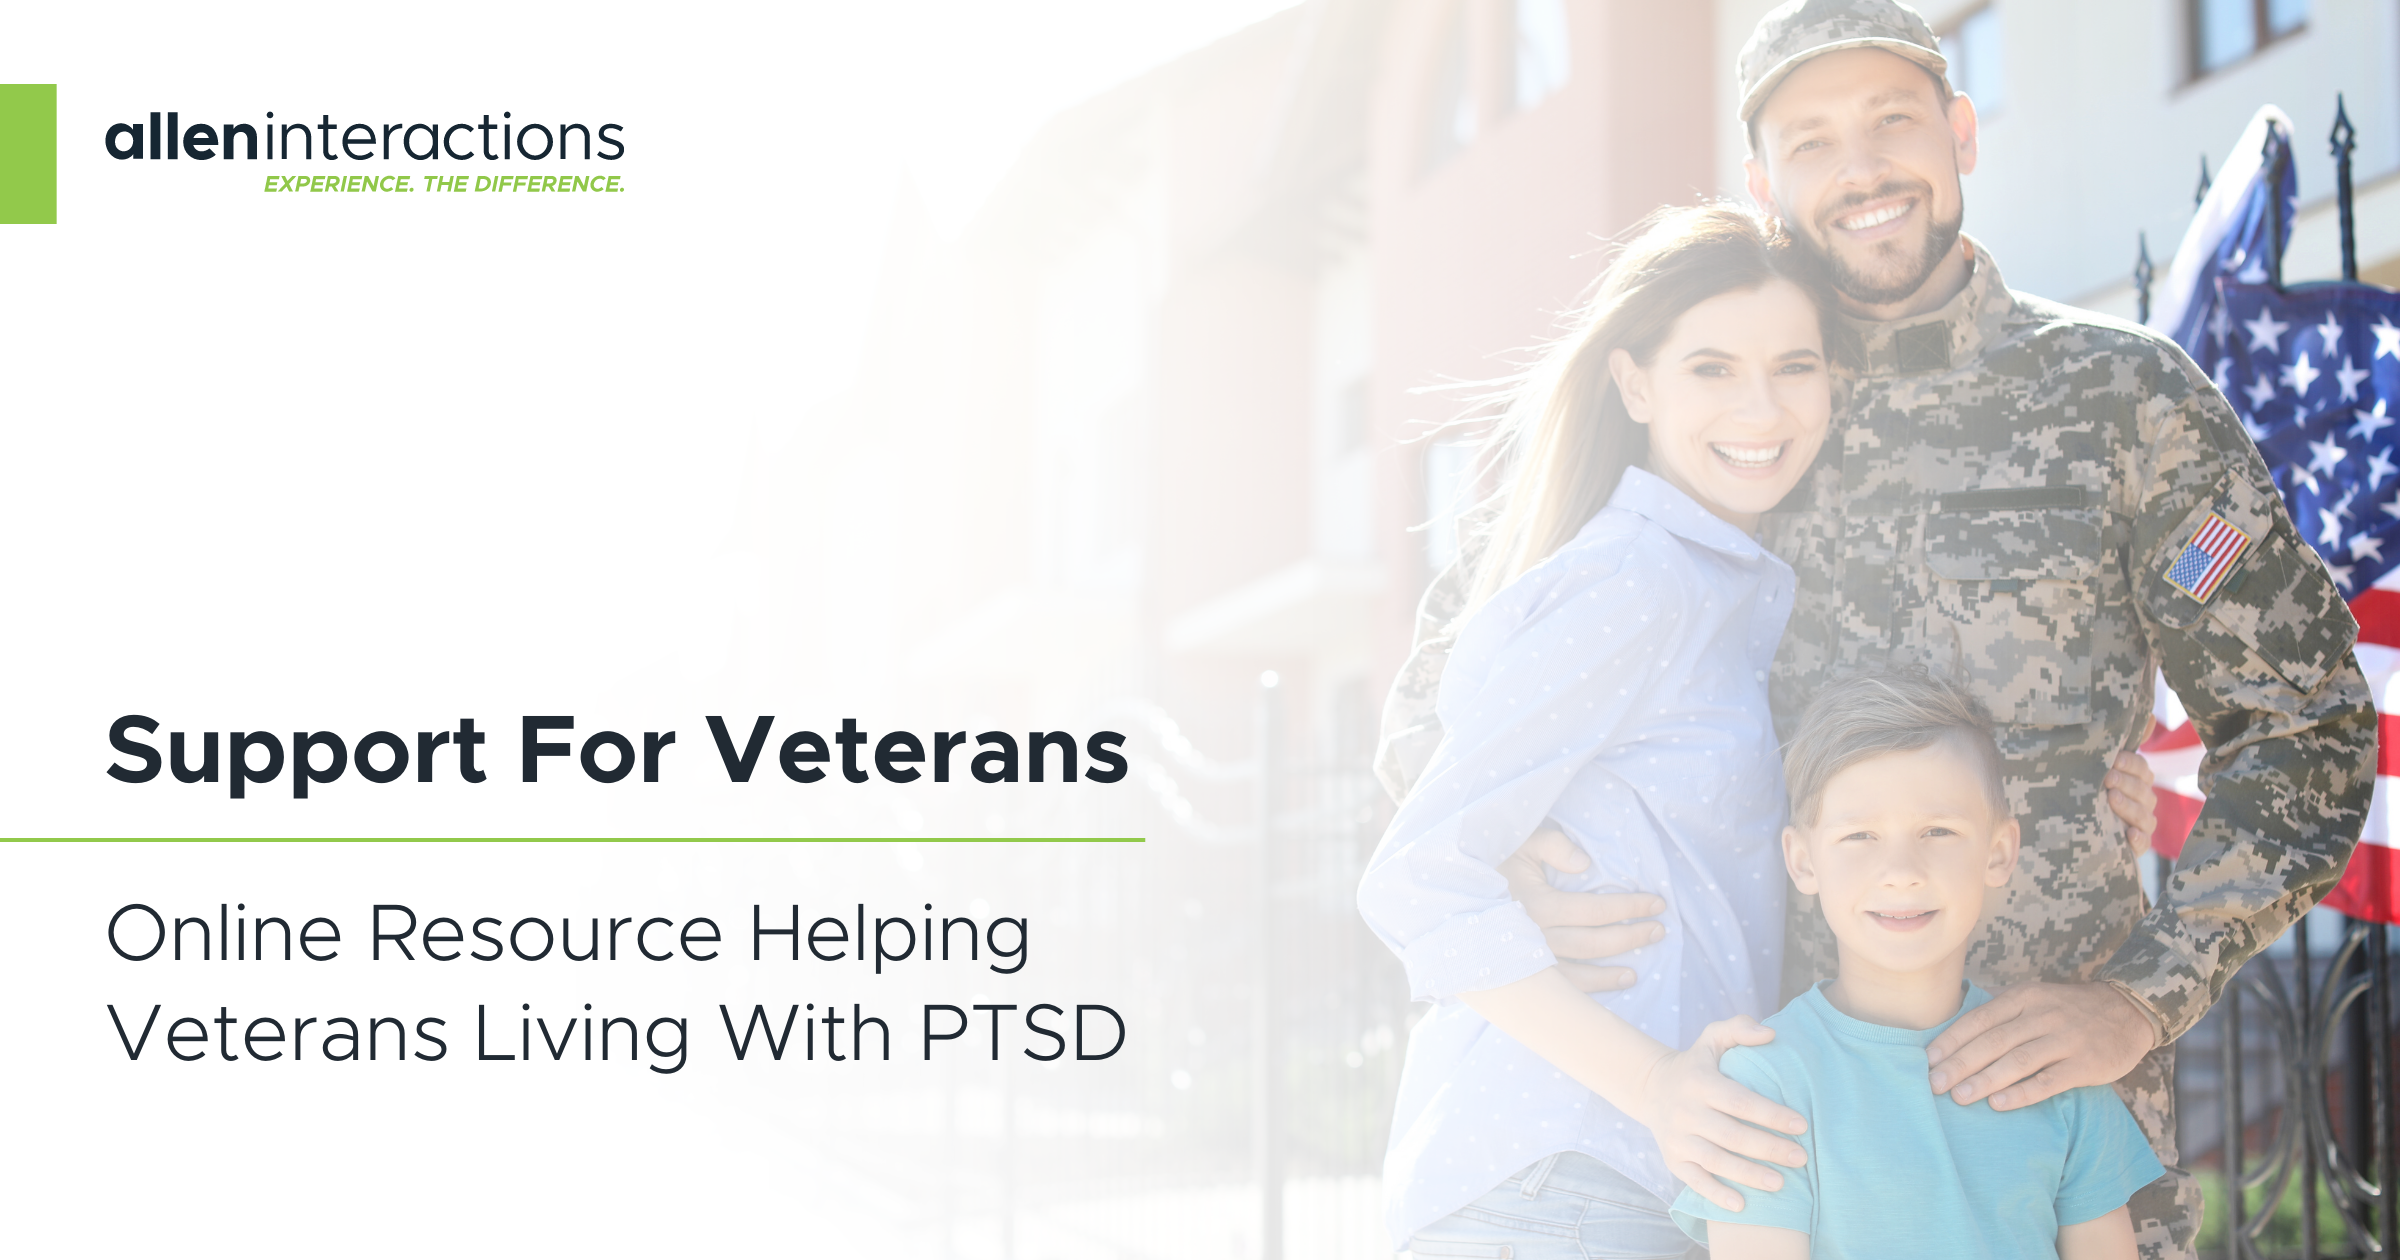 Support for Veterans: Online Resource Helping Veterans Living with PTSD